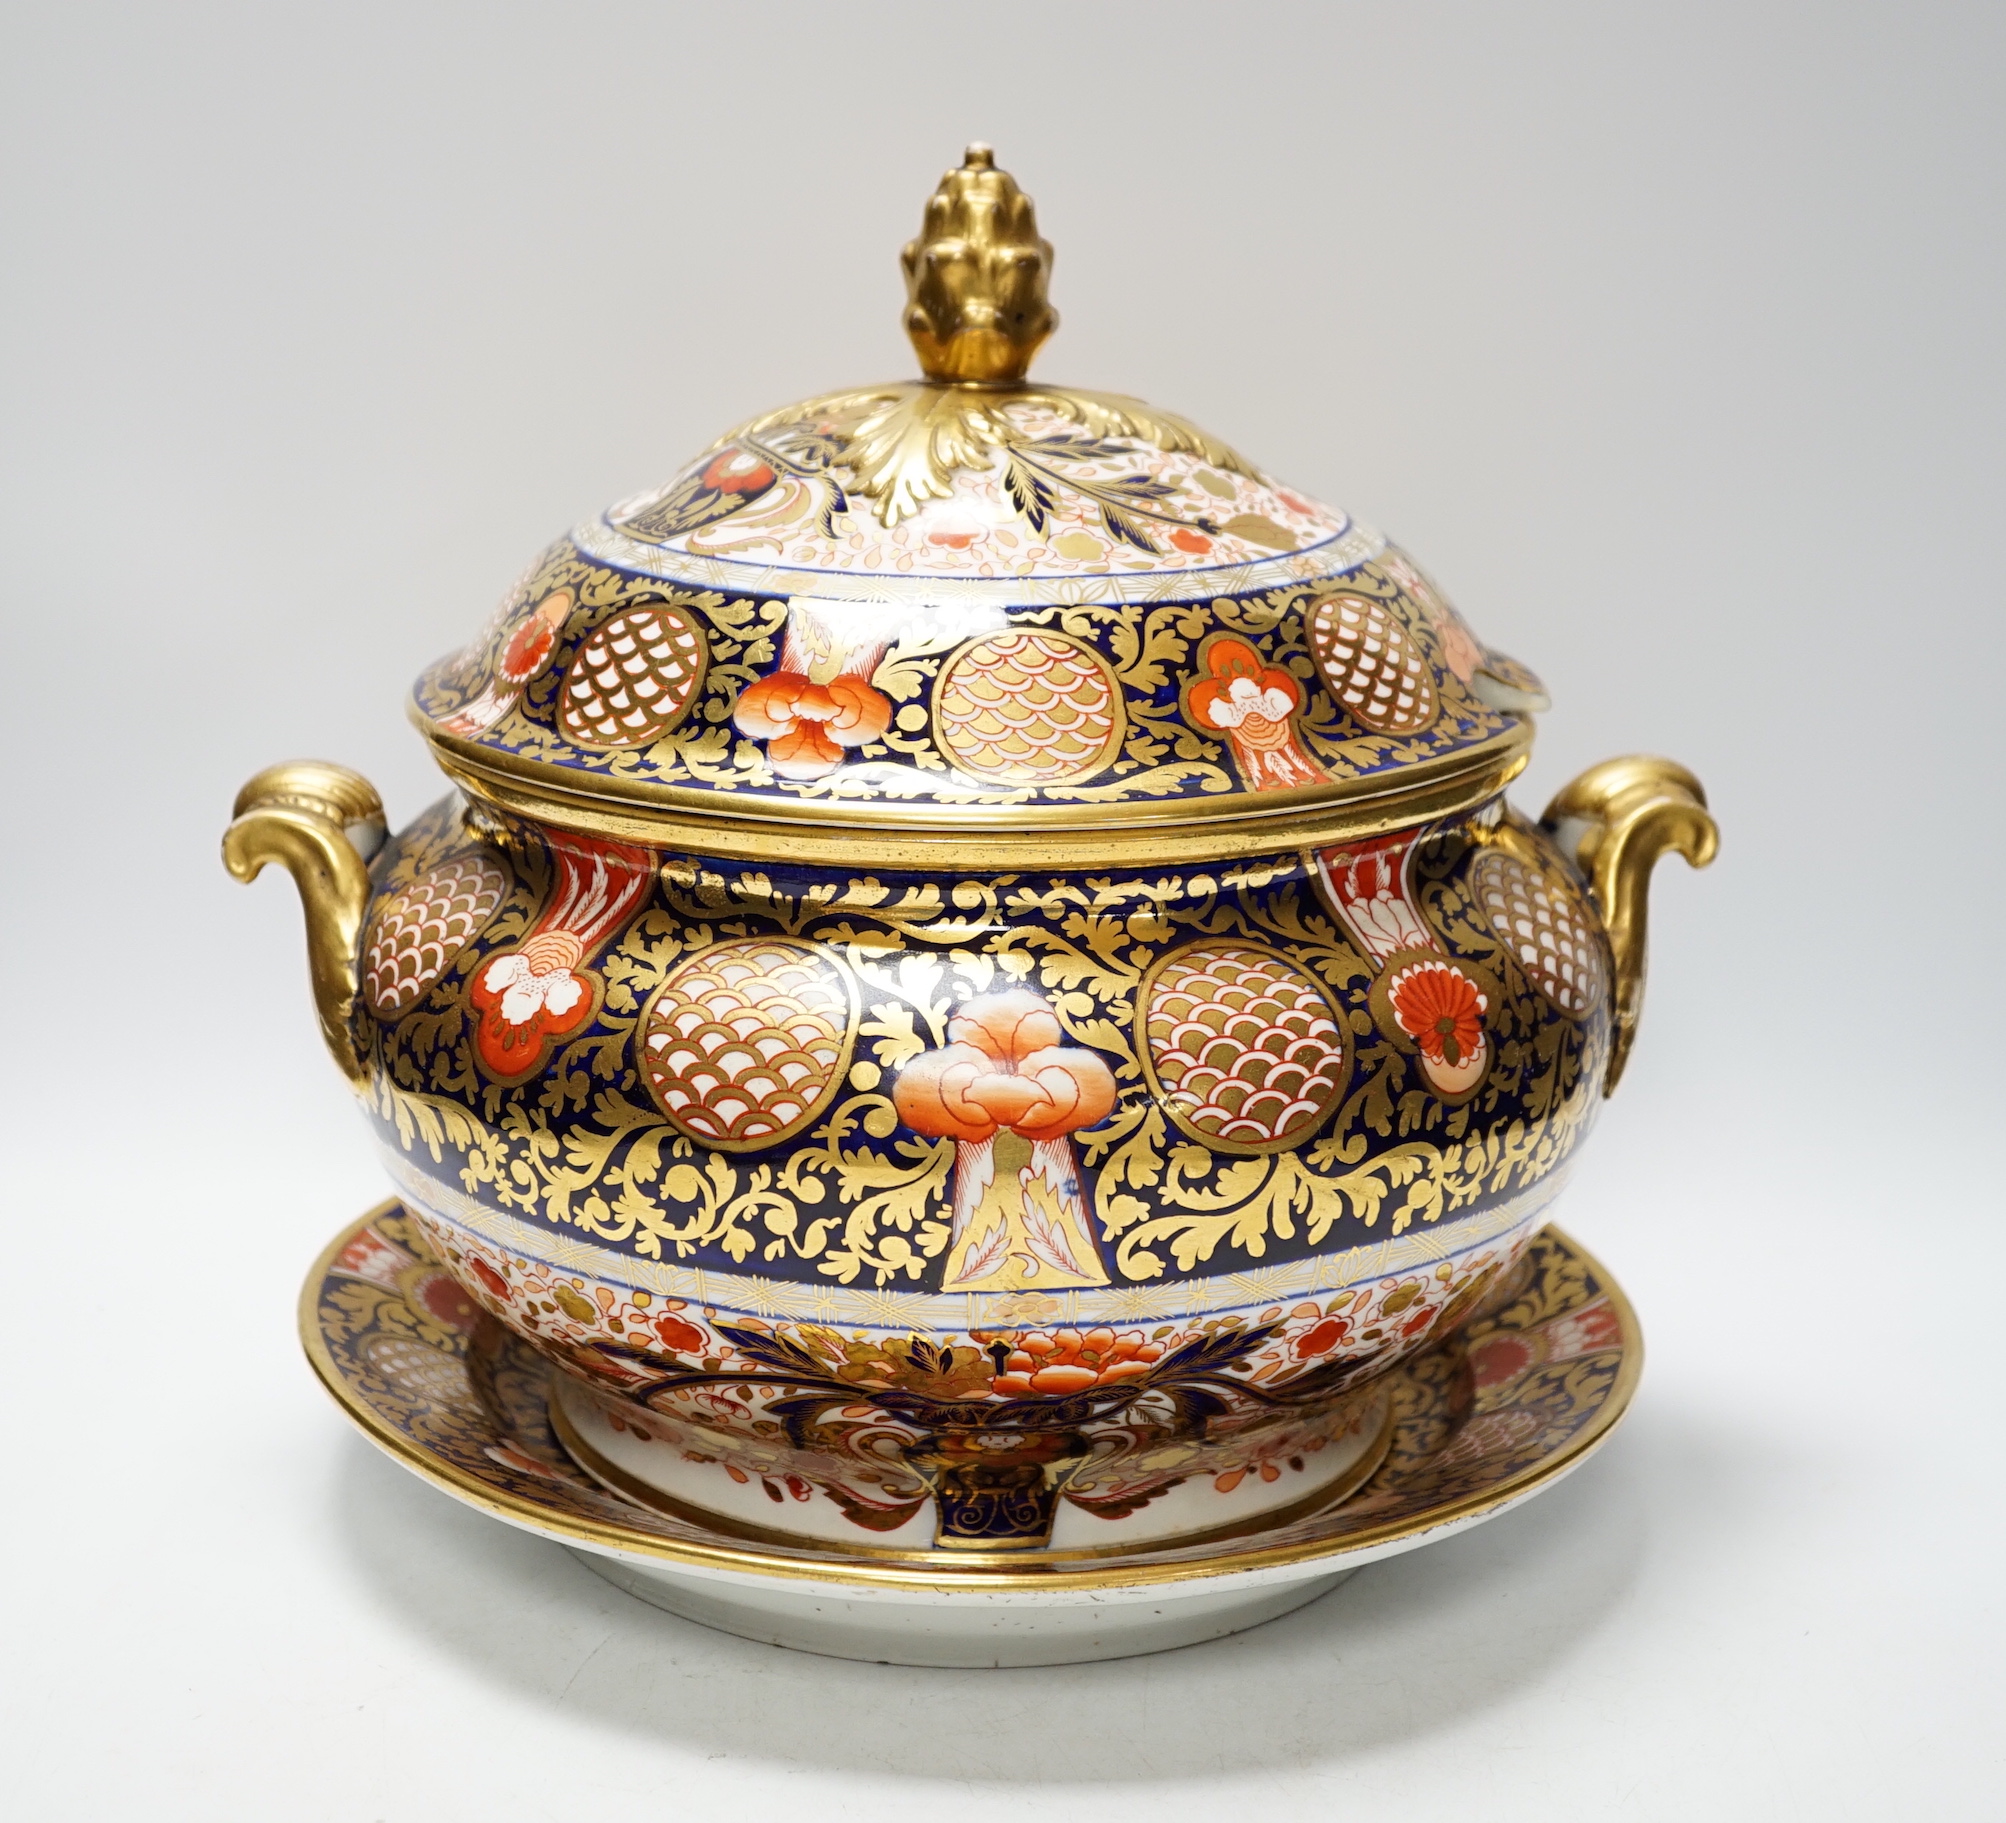 A soup tureen on stand with cover, ‘Japan pattern’, 29cm high